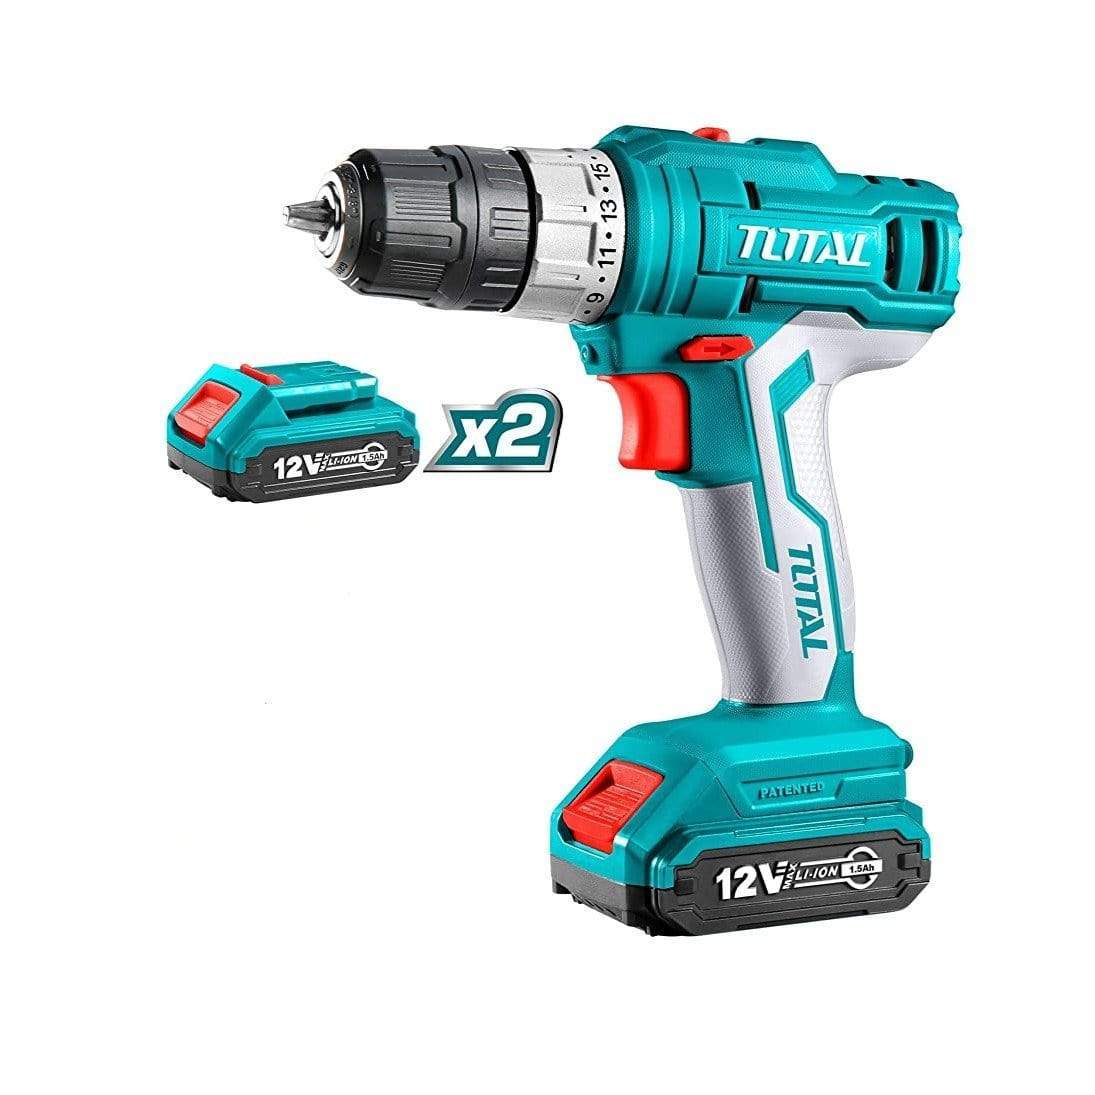 Total Lithium-Ion Cordless Drill 12V with Two Batteries - TDLI122 | Supply Master | Accra, Ghana Tools Building Steel Engineering Hardware tool